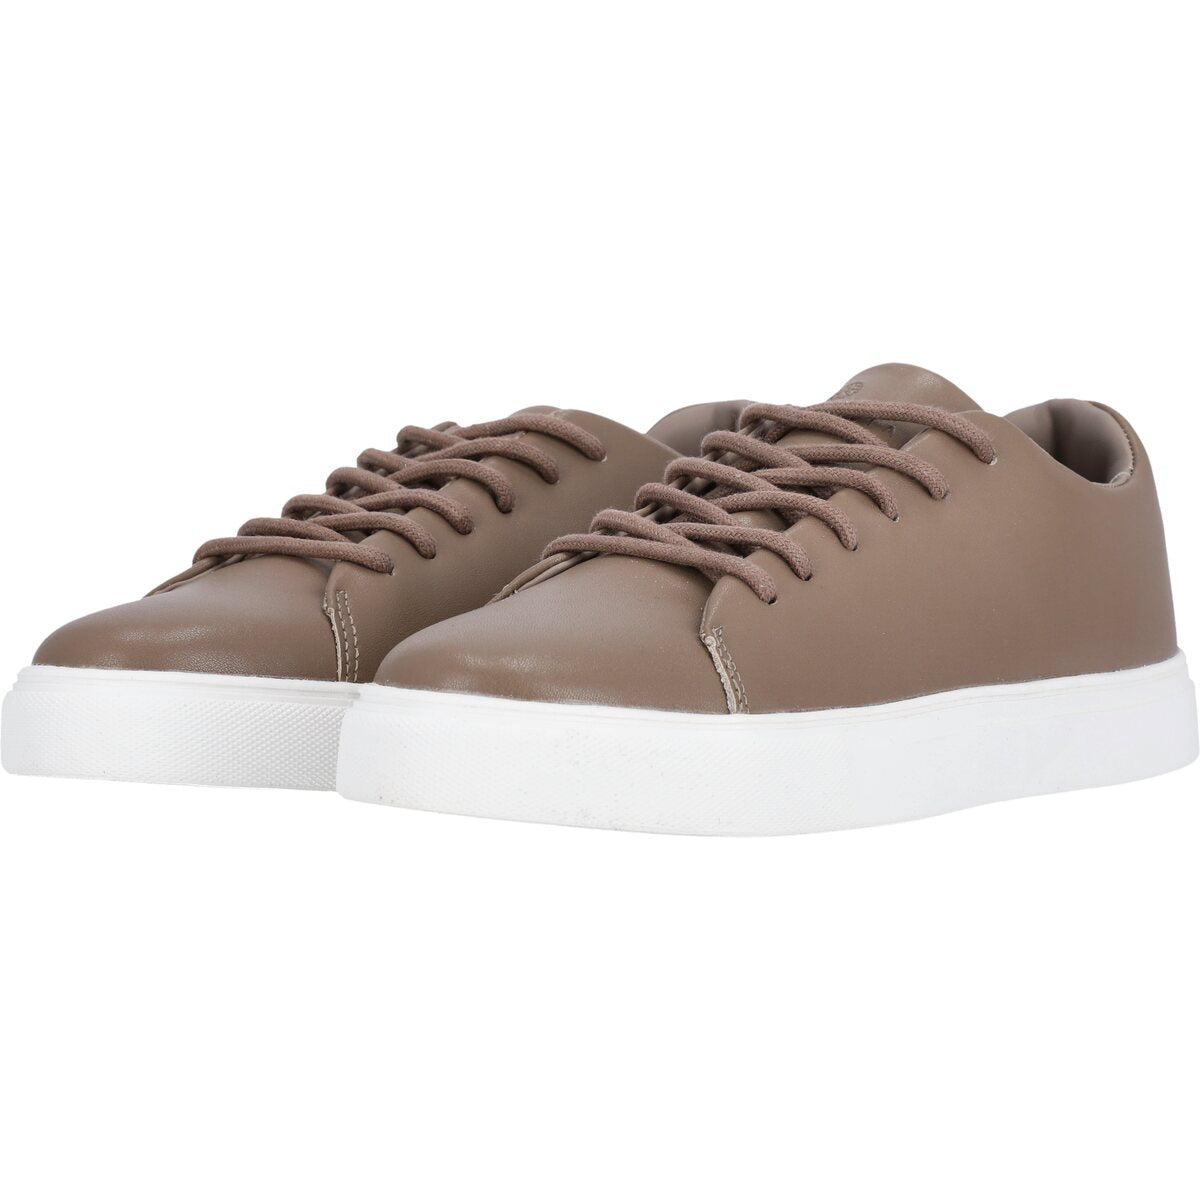 Athlecia Christinia Classic Sneakers - Taupe 1 Shaws Department Stores